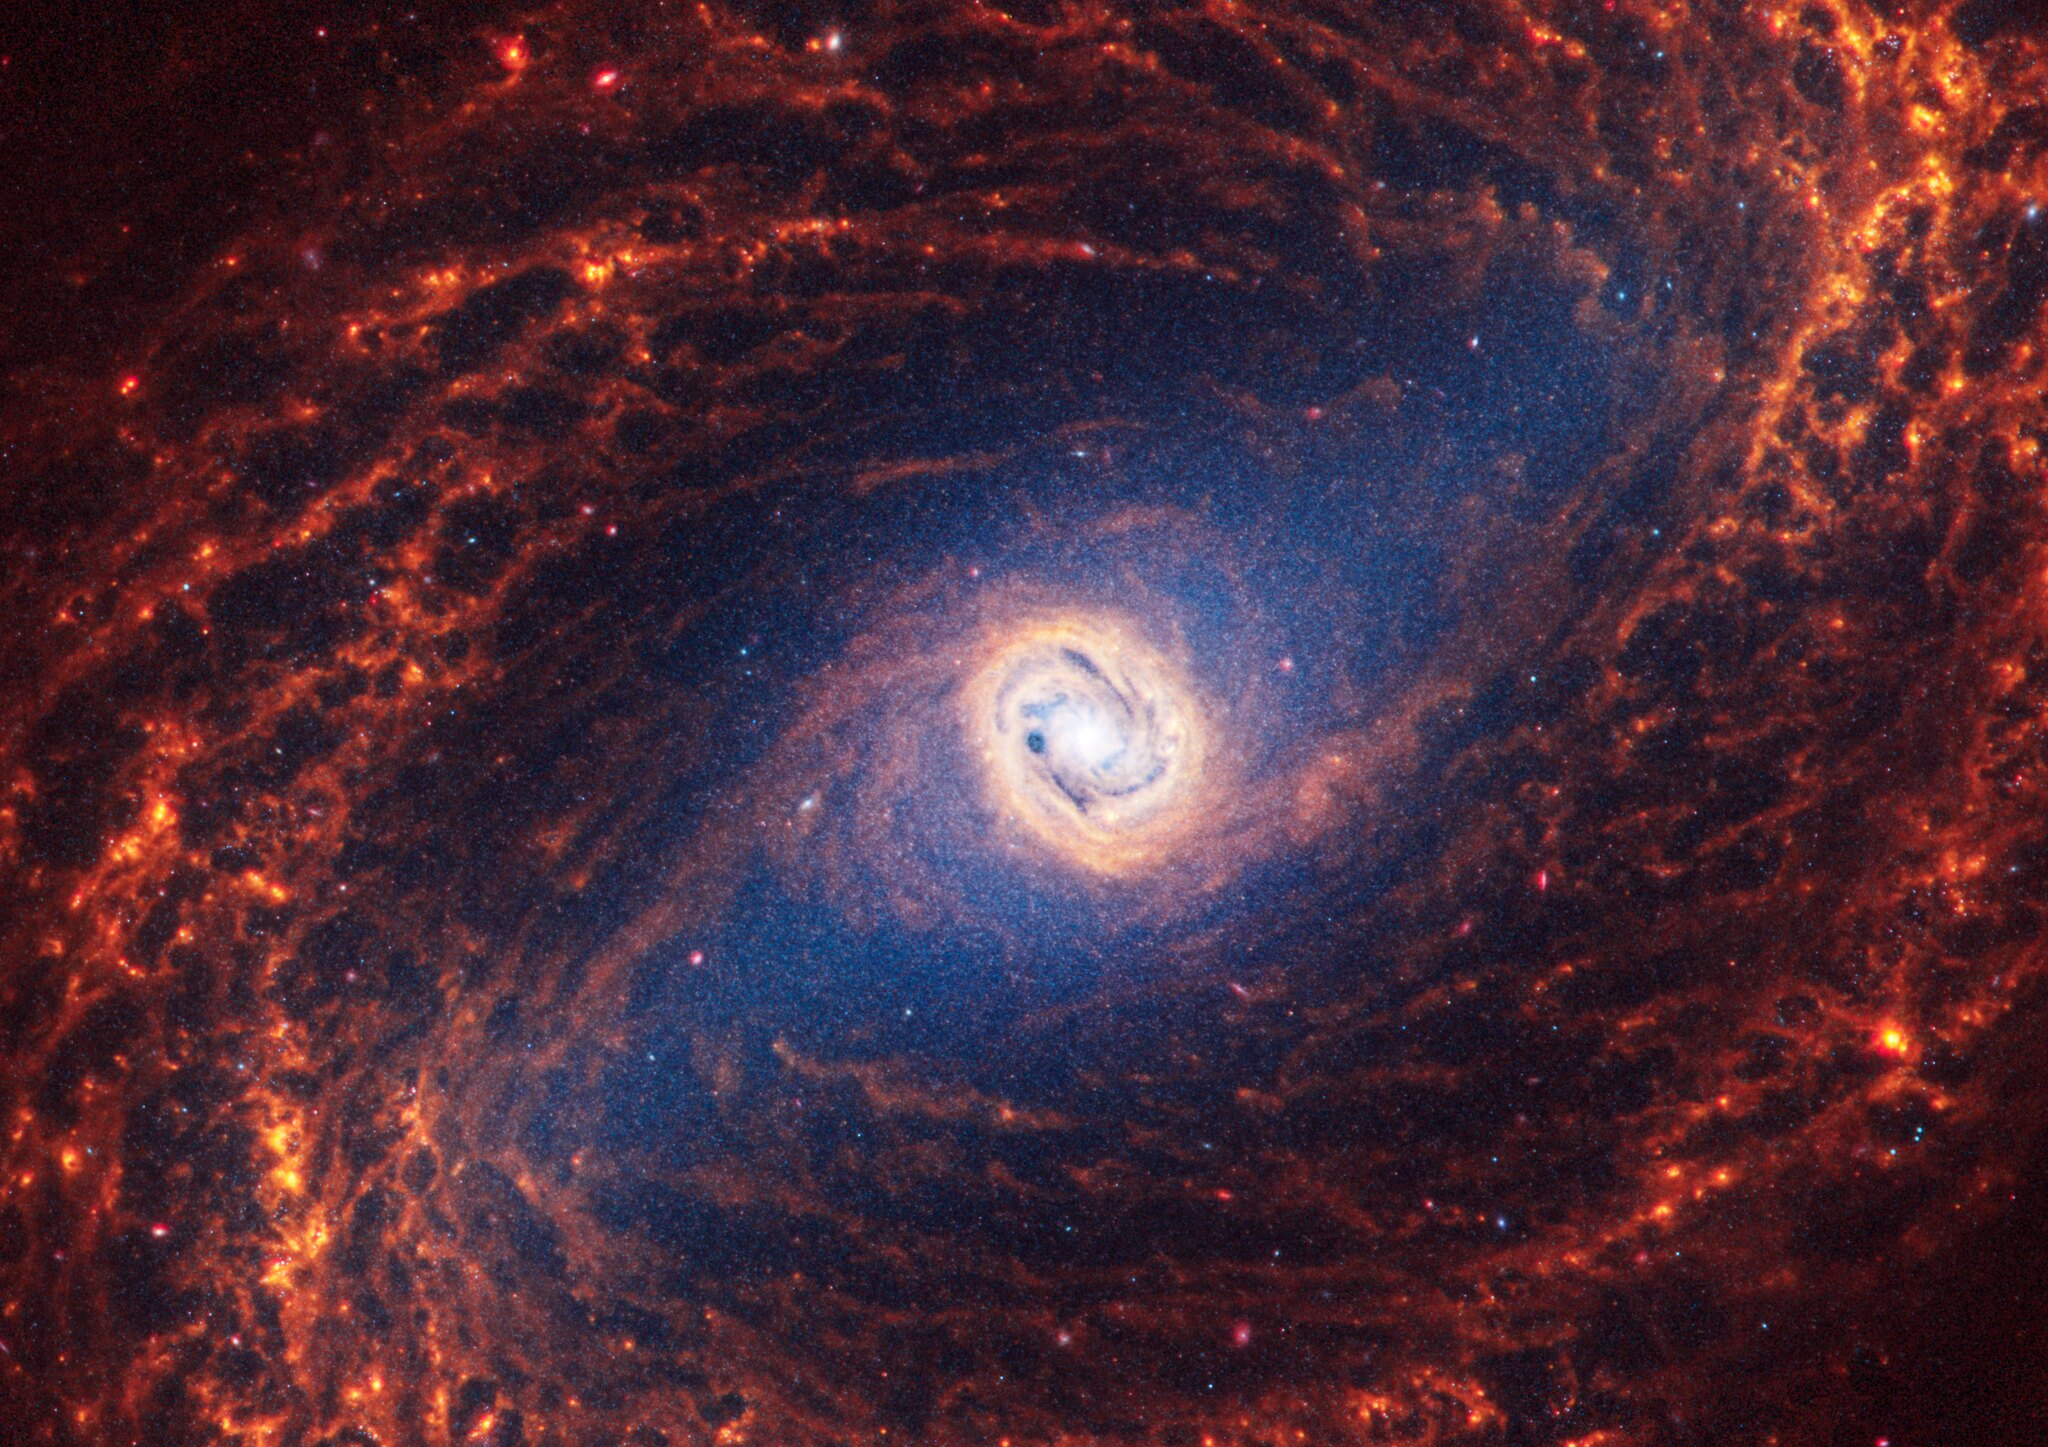 In Webb's image, the spiral arms are composed of many filaments in shades of orange.  Thin fabric strips connect from the core, via the rod to the spiral arms.